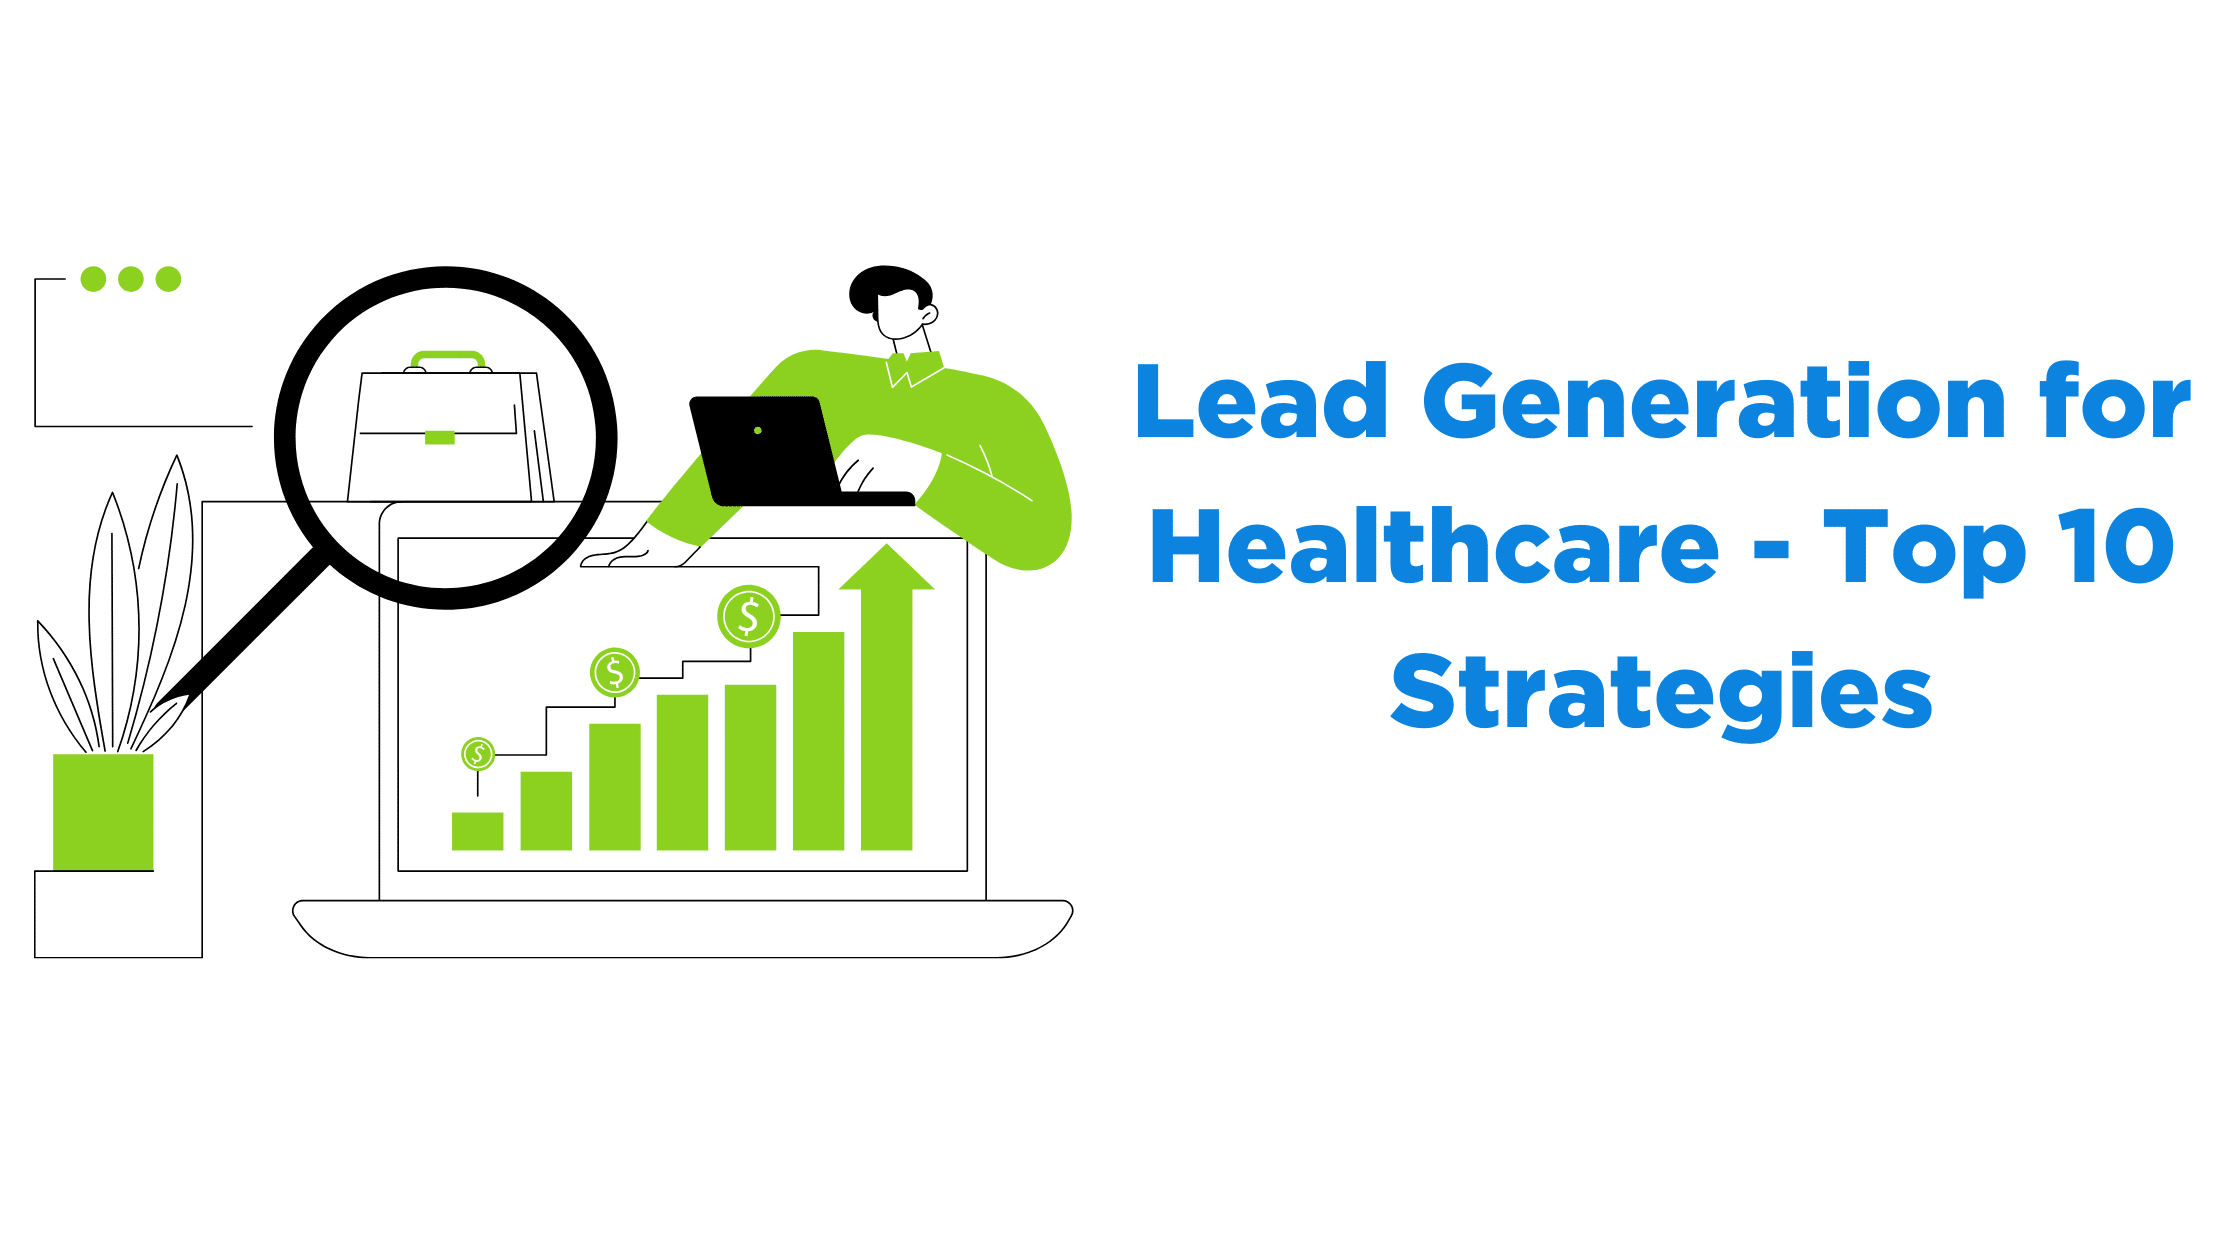 Lead Generation for Healthcare - Top 10 Strategies